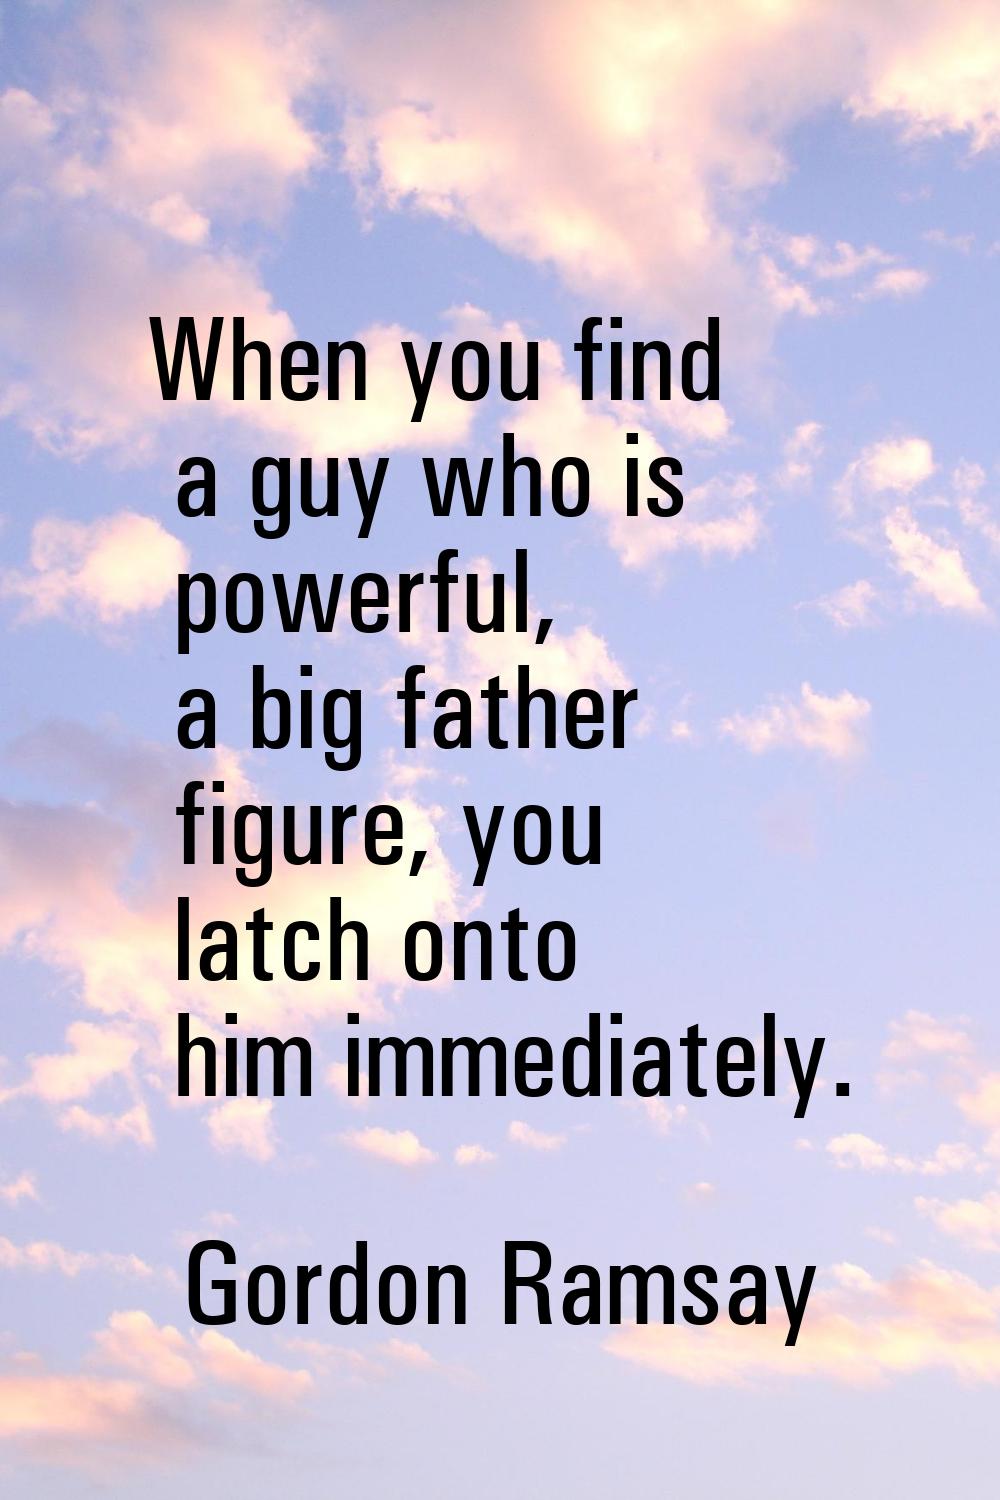 When you find a guy who is powerful, a big father figure, you latch onto him immediately.